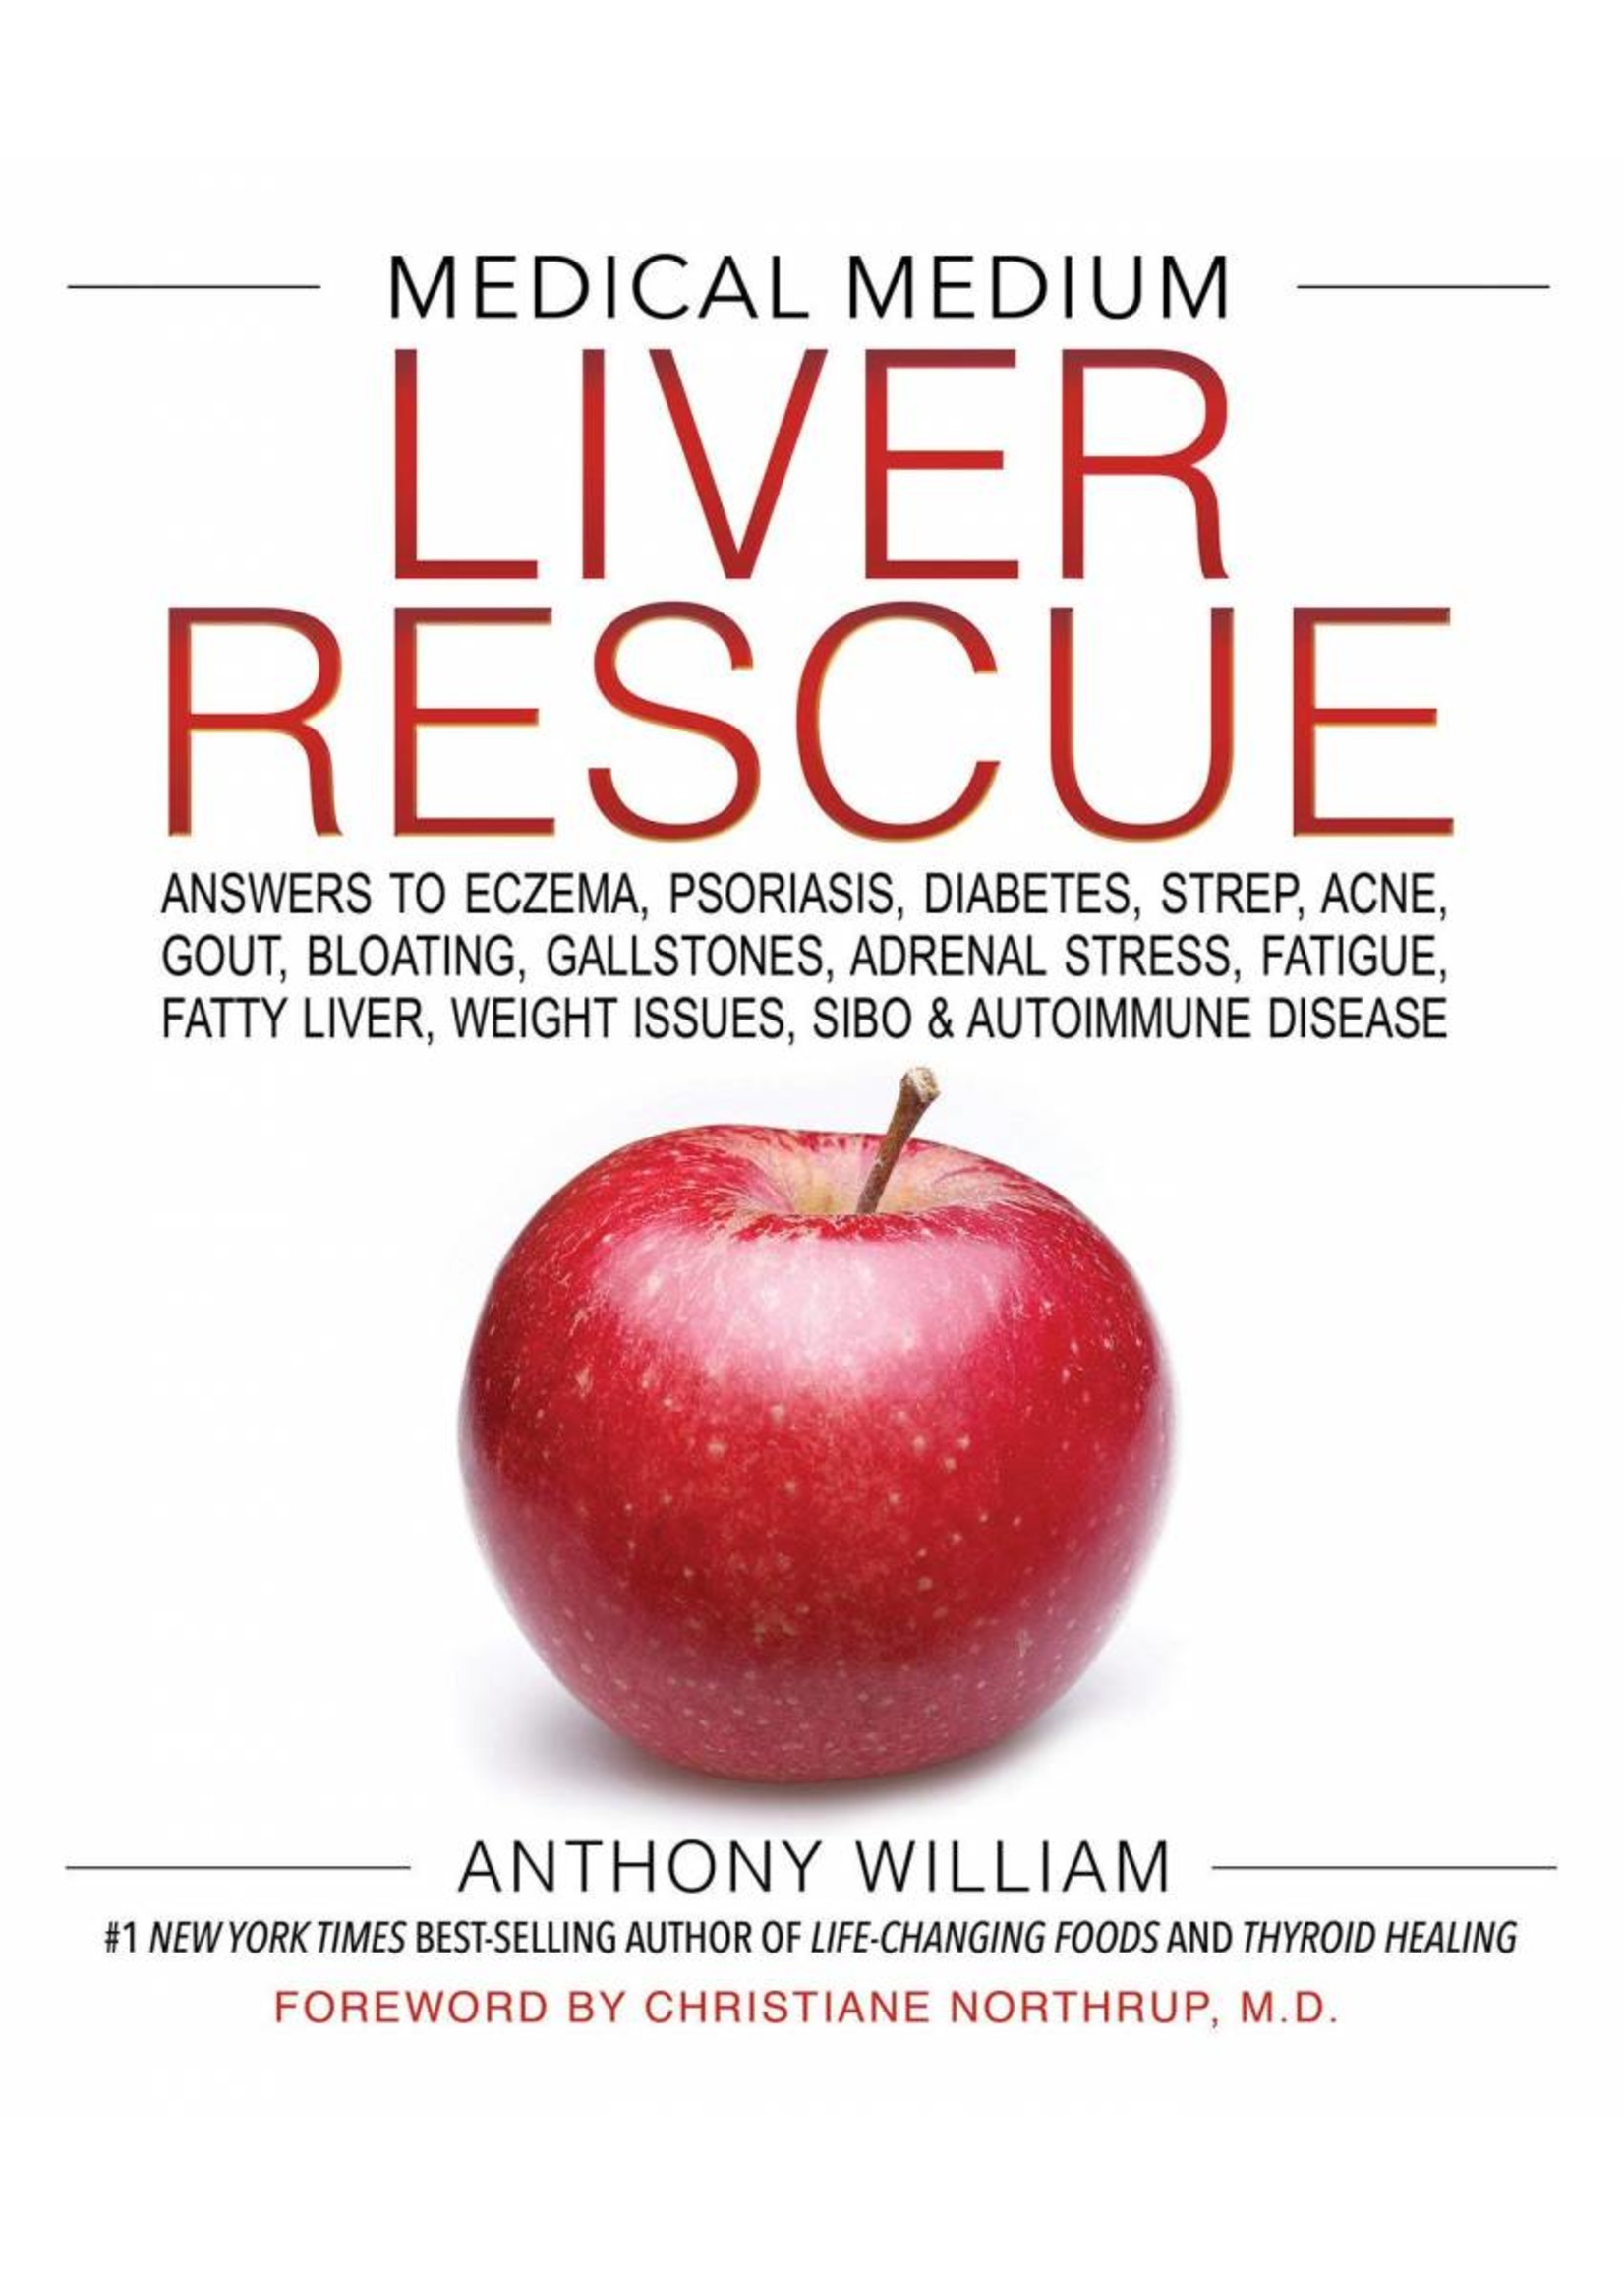 Medical Medium Liver Rescue | Answers to Eczema, Psoriasis, Diabetes, Strep, Acne, Gout, Bloating, Gallstones, Adrenal Stress, Fatigue, Fatty Liver, Weight Issues, SIBO & Autoimmune Disease